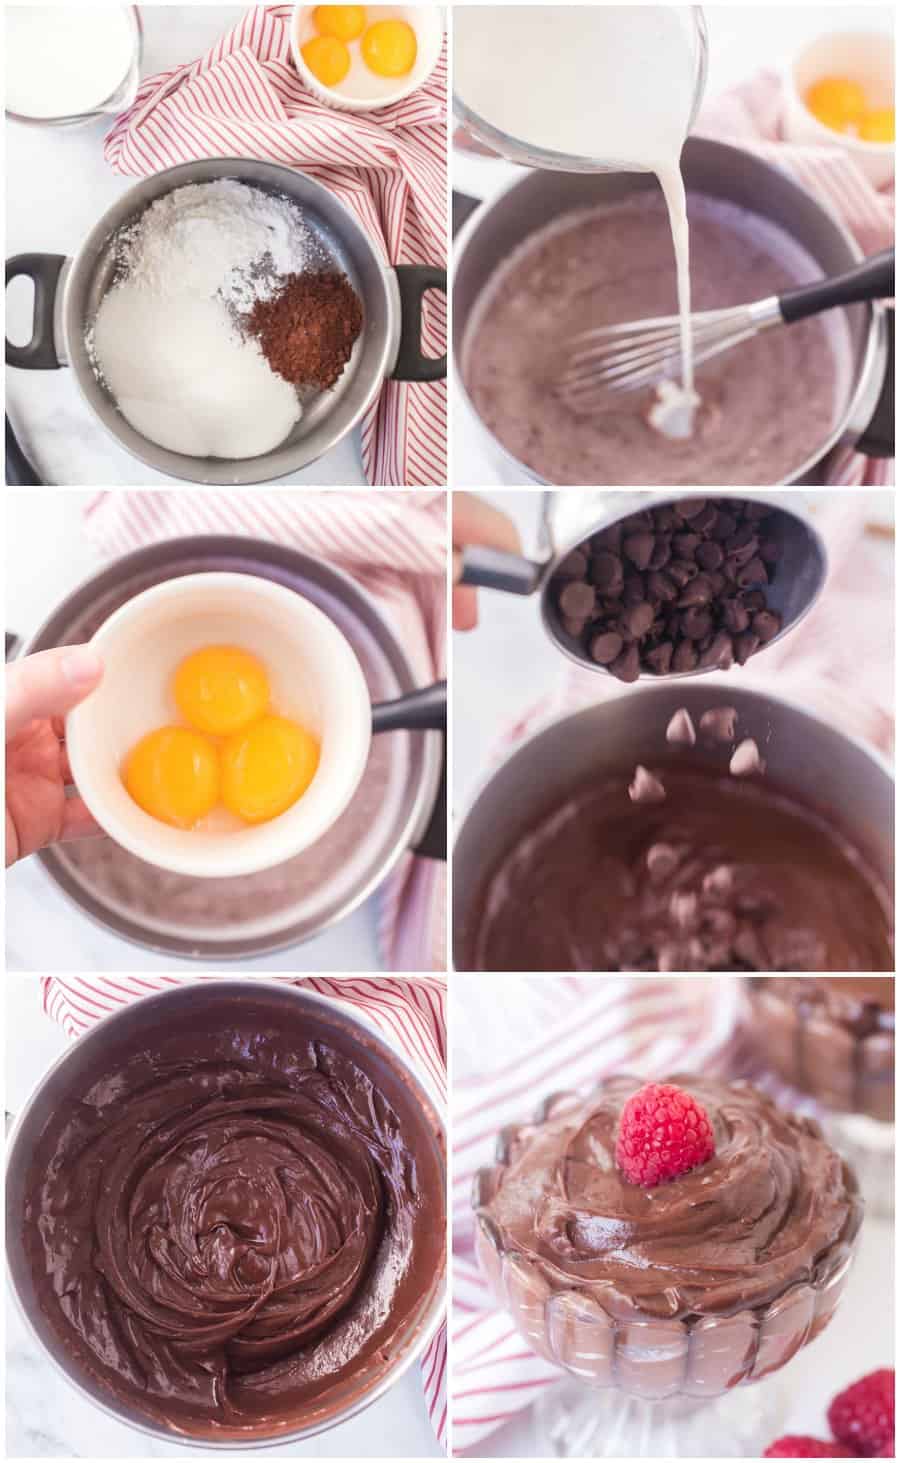 8 cooking steps with pictures on how to make pudding